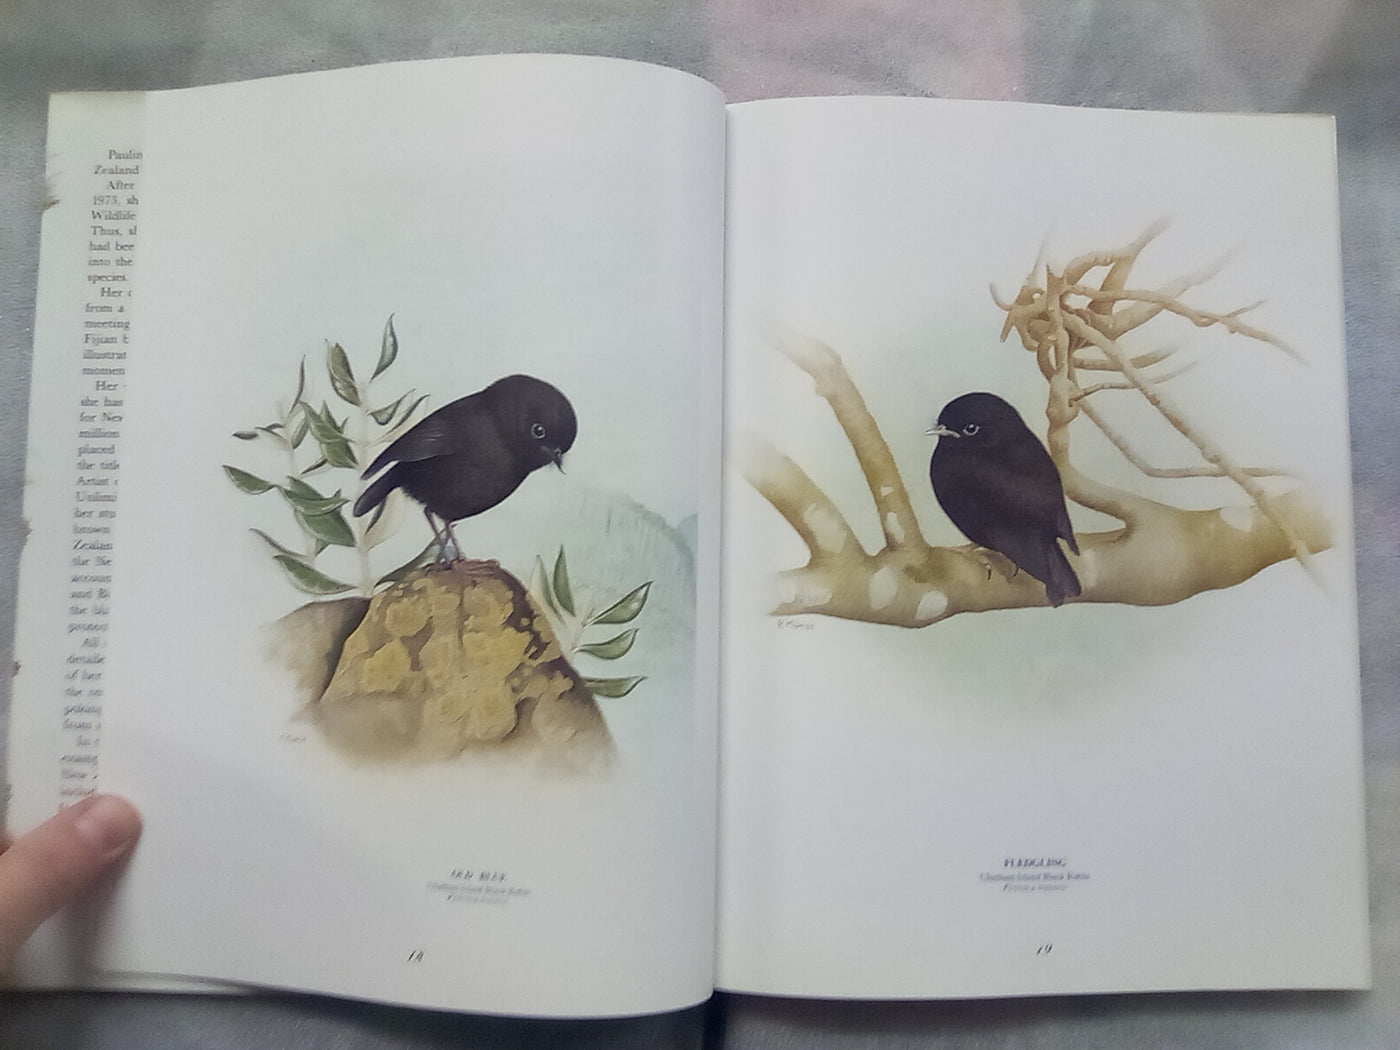 Wild Natives by Pauline Morse - Signed and Numbered Edition